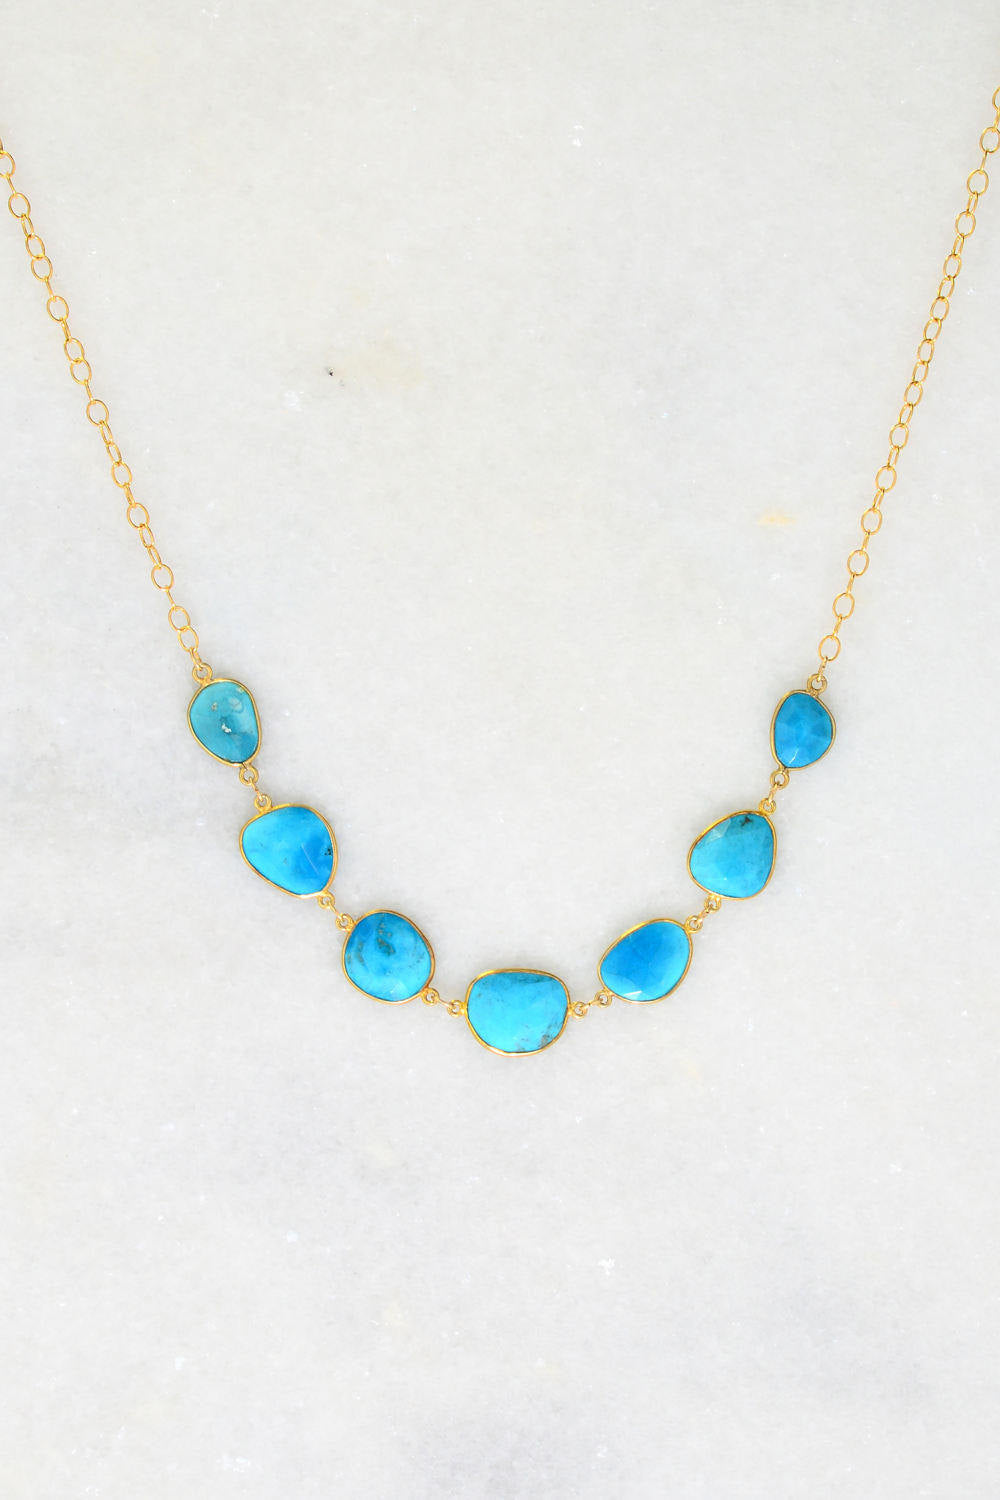 Turquoise Necklace, Bezel Necklaces, Gold Gemstone Necklace, Wedding Necklace, Irregular Necklace, Bridal Gift, Gemstone Connectors Necklace